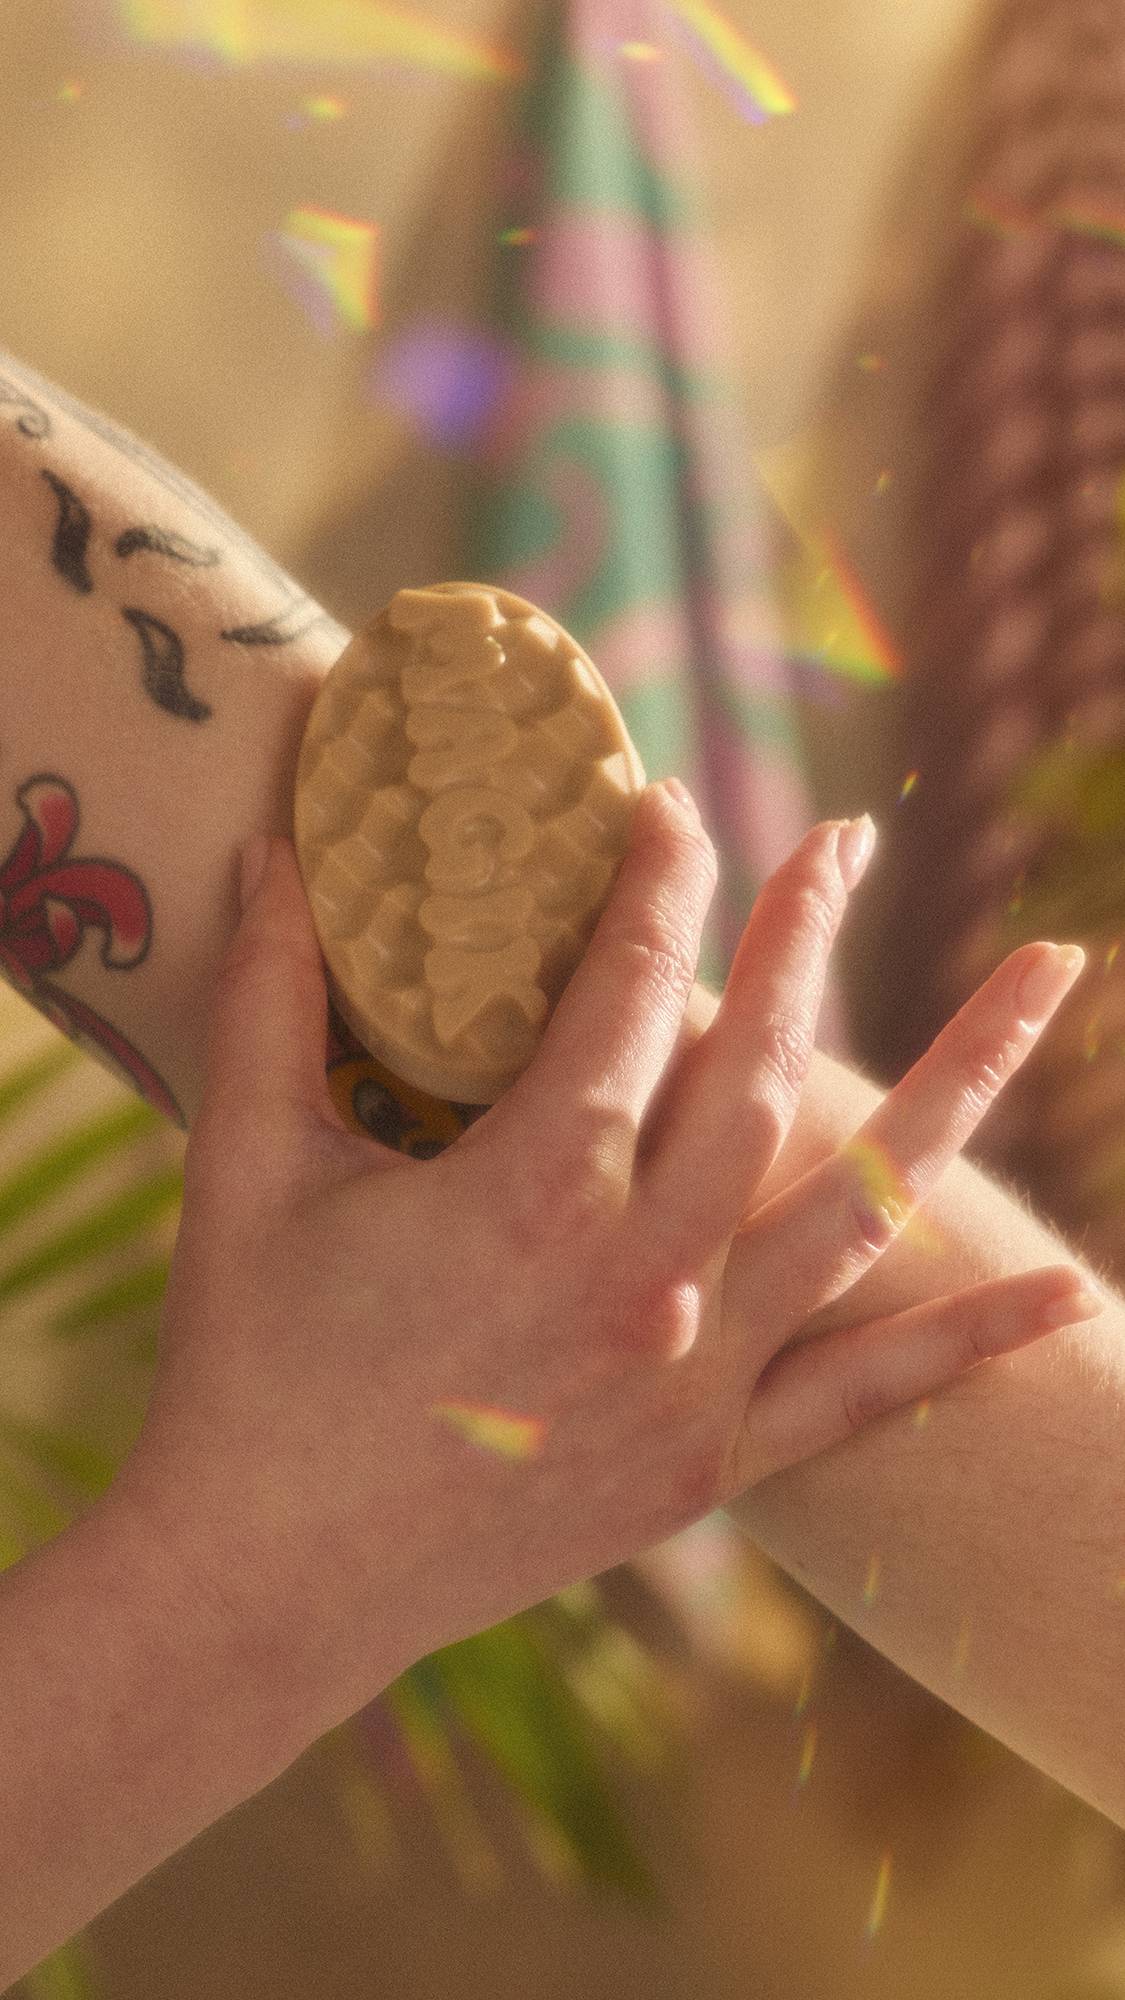 A close-up image of the model holding the Magik massage bar and smoothing it over their forearm. The image has flecks of rainbow reflections on a warm, sepia tone.